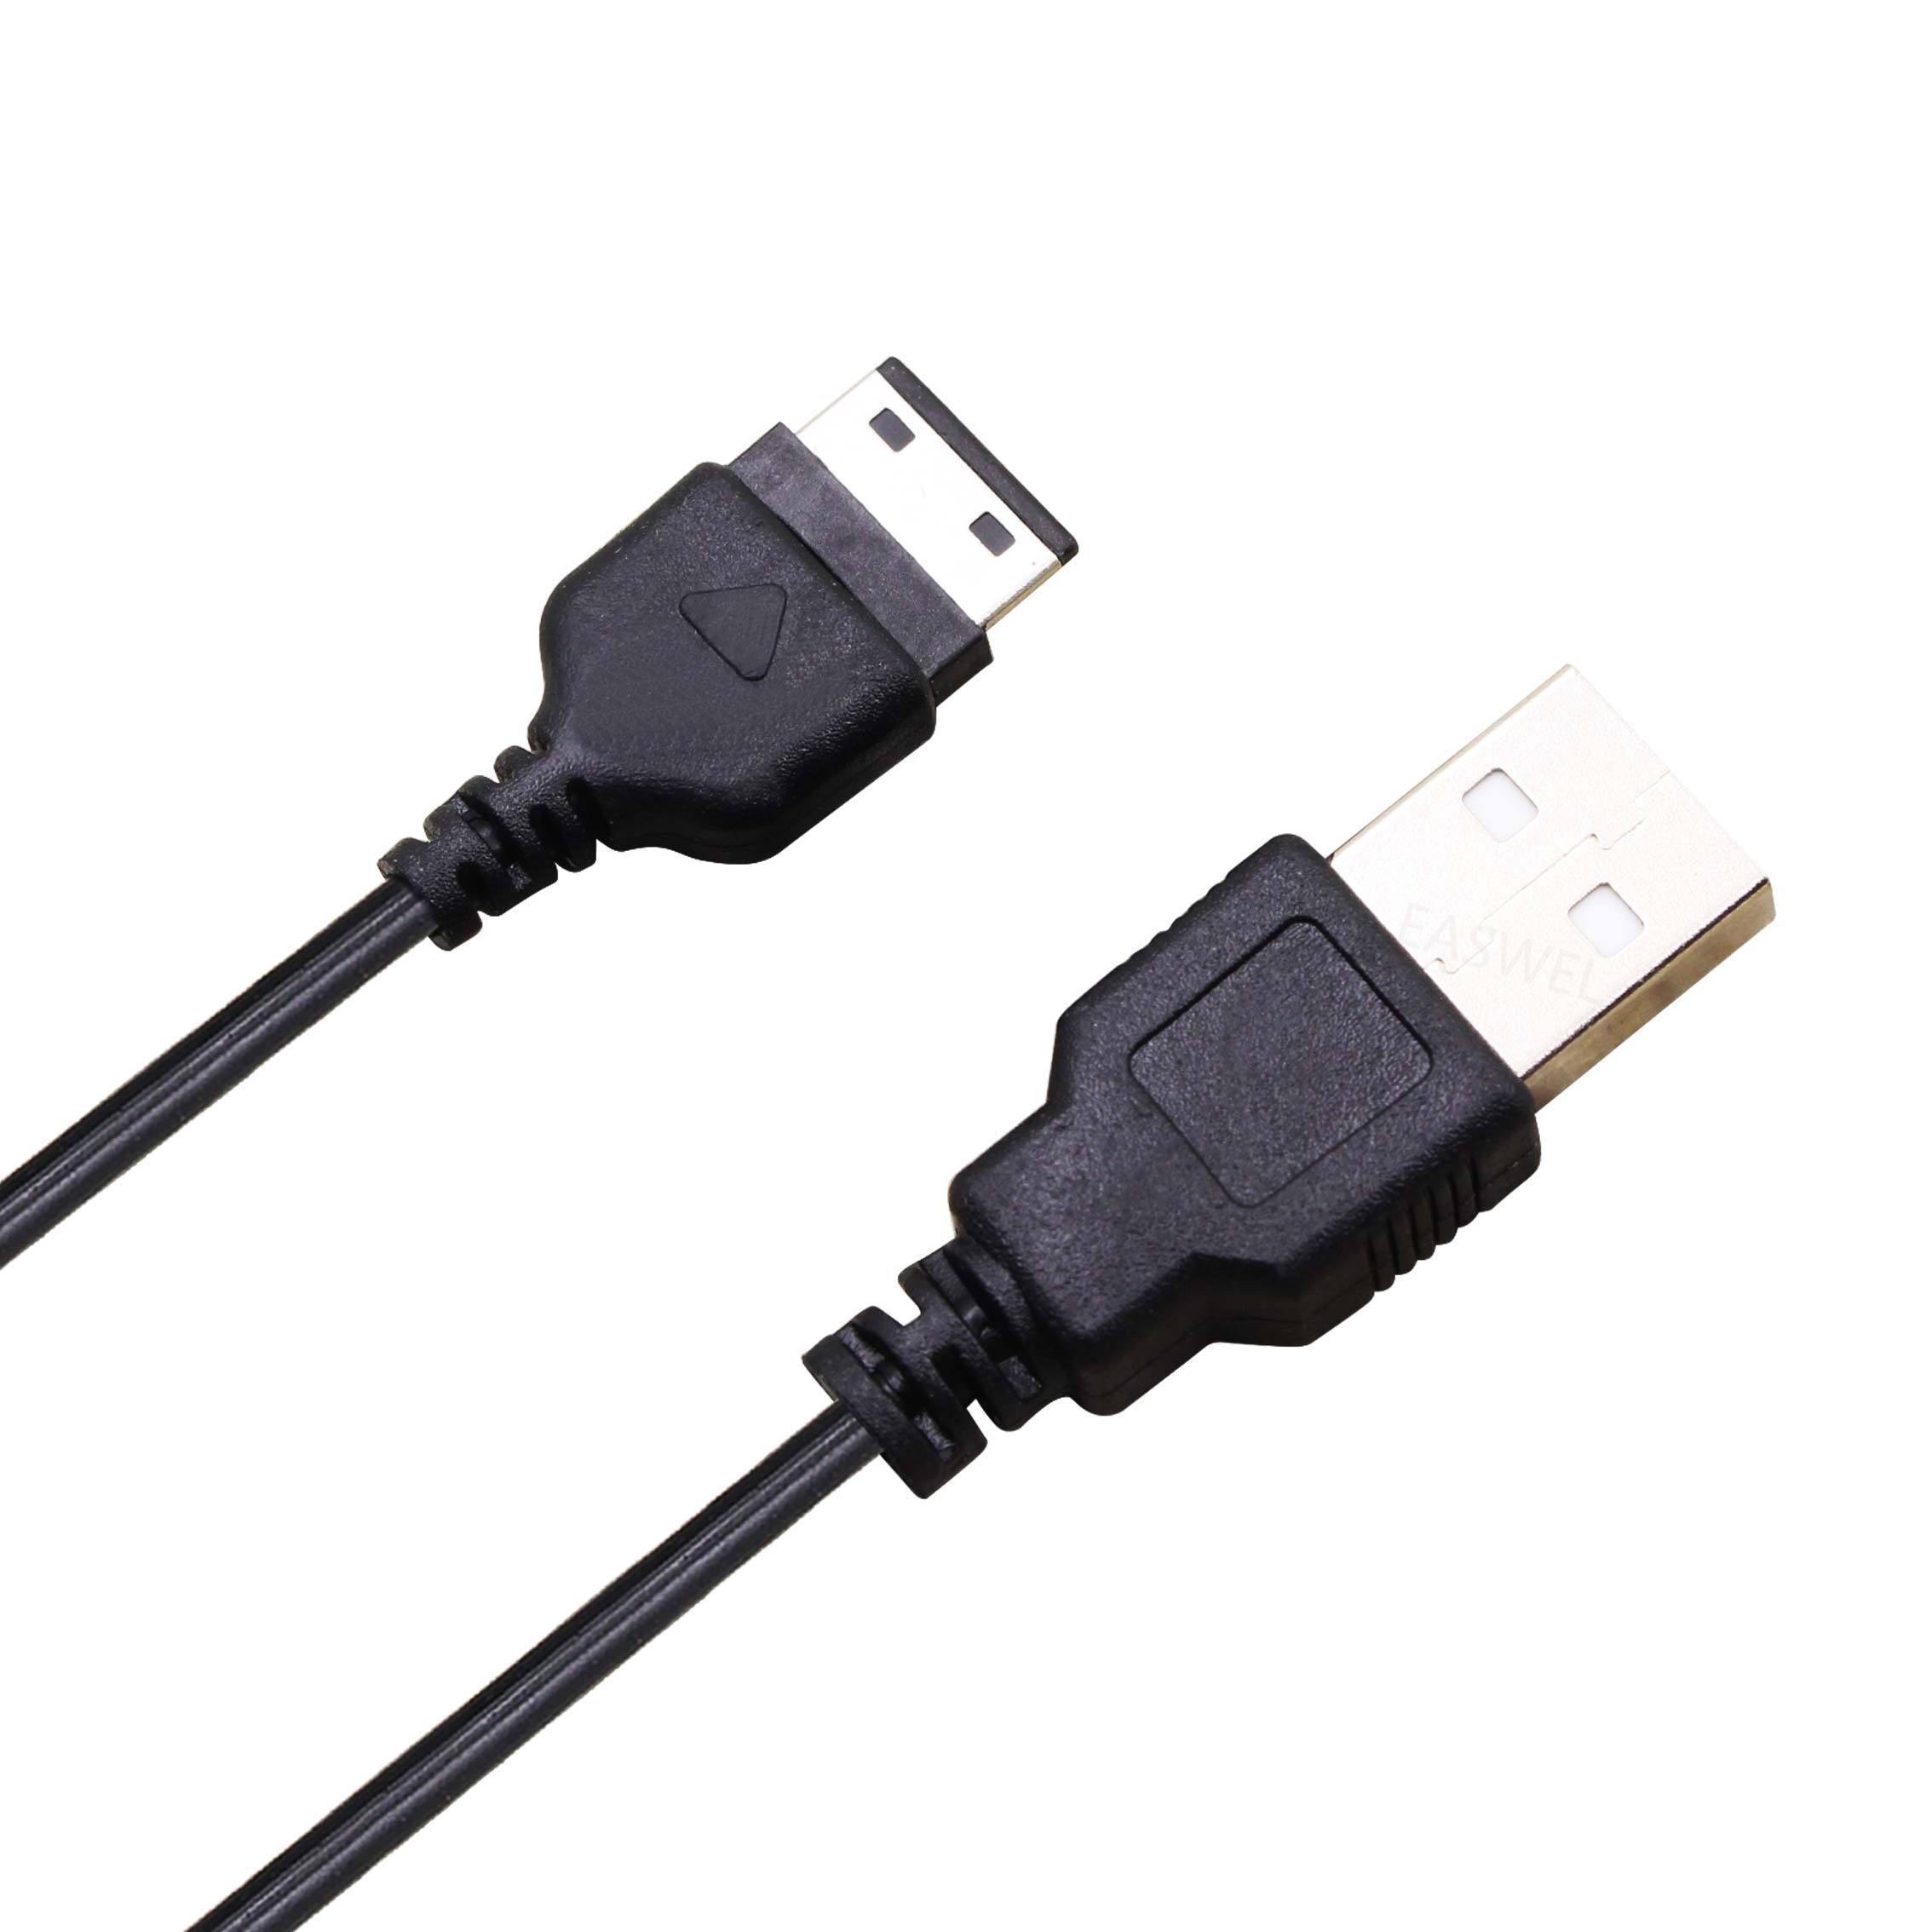 USB Charger Data Cable Koord voor Samsung sch-r400 sch-r410 sch-r420 sgh-d830 sgh-d840 sgh-d880 sgh-d900 sph-m340 gt-m3510